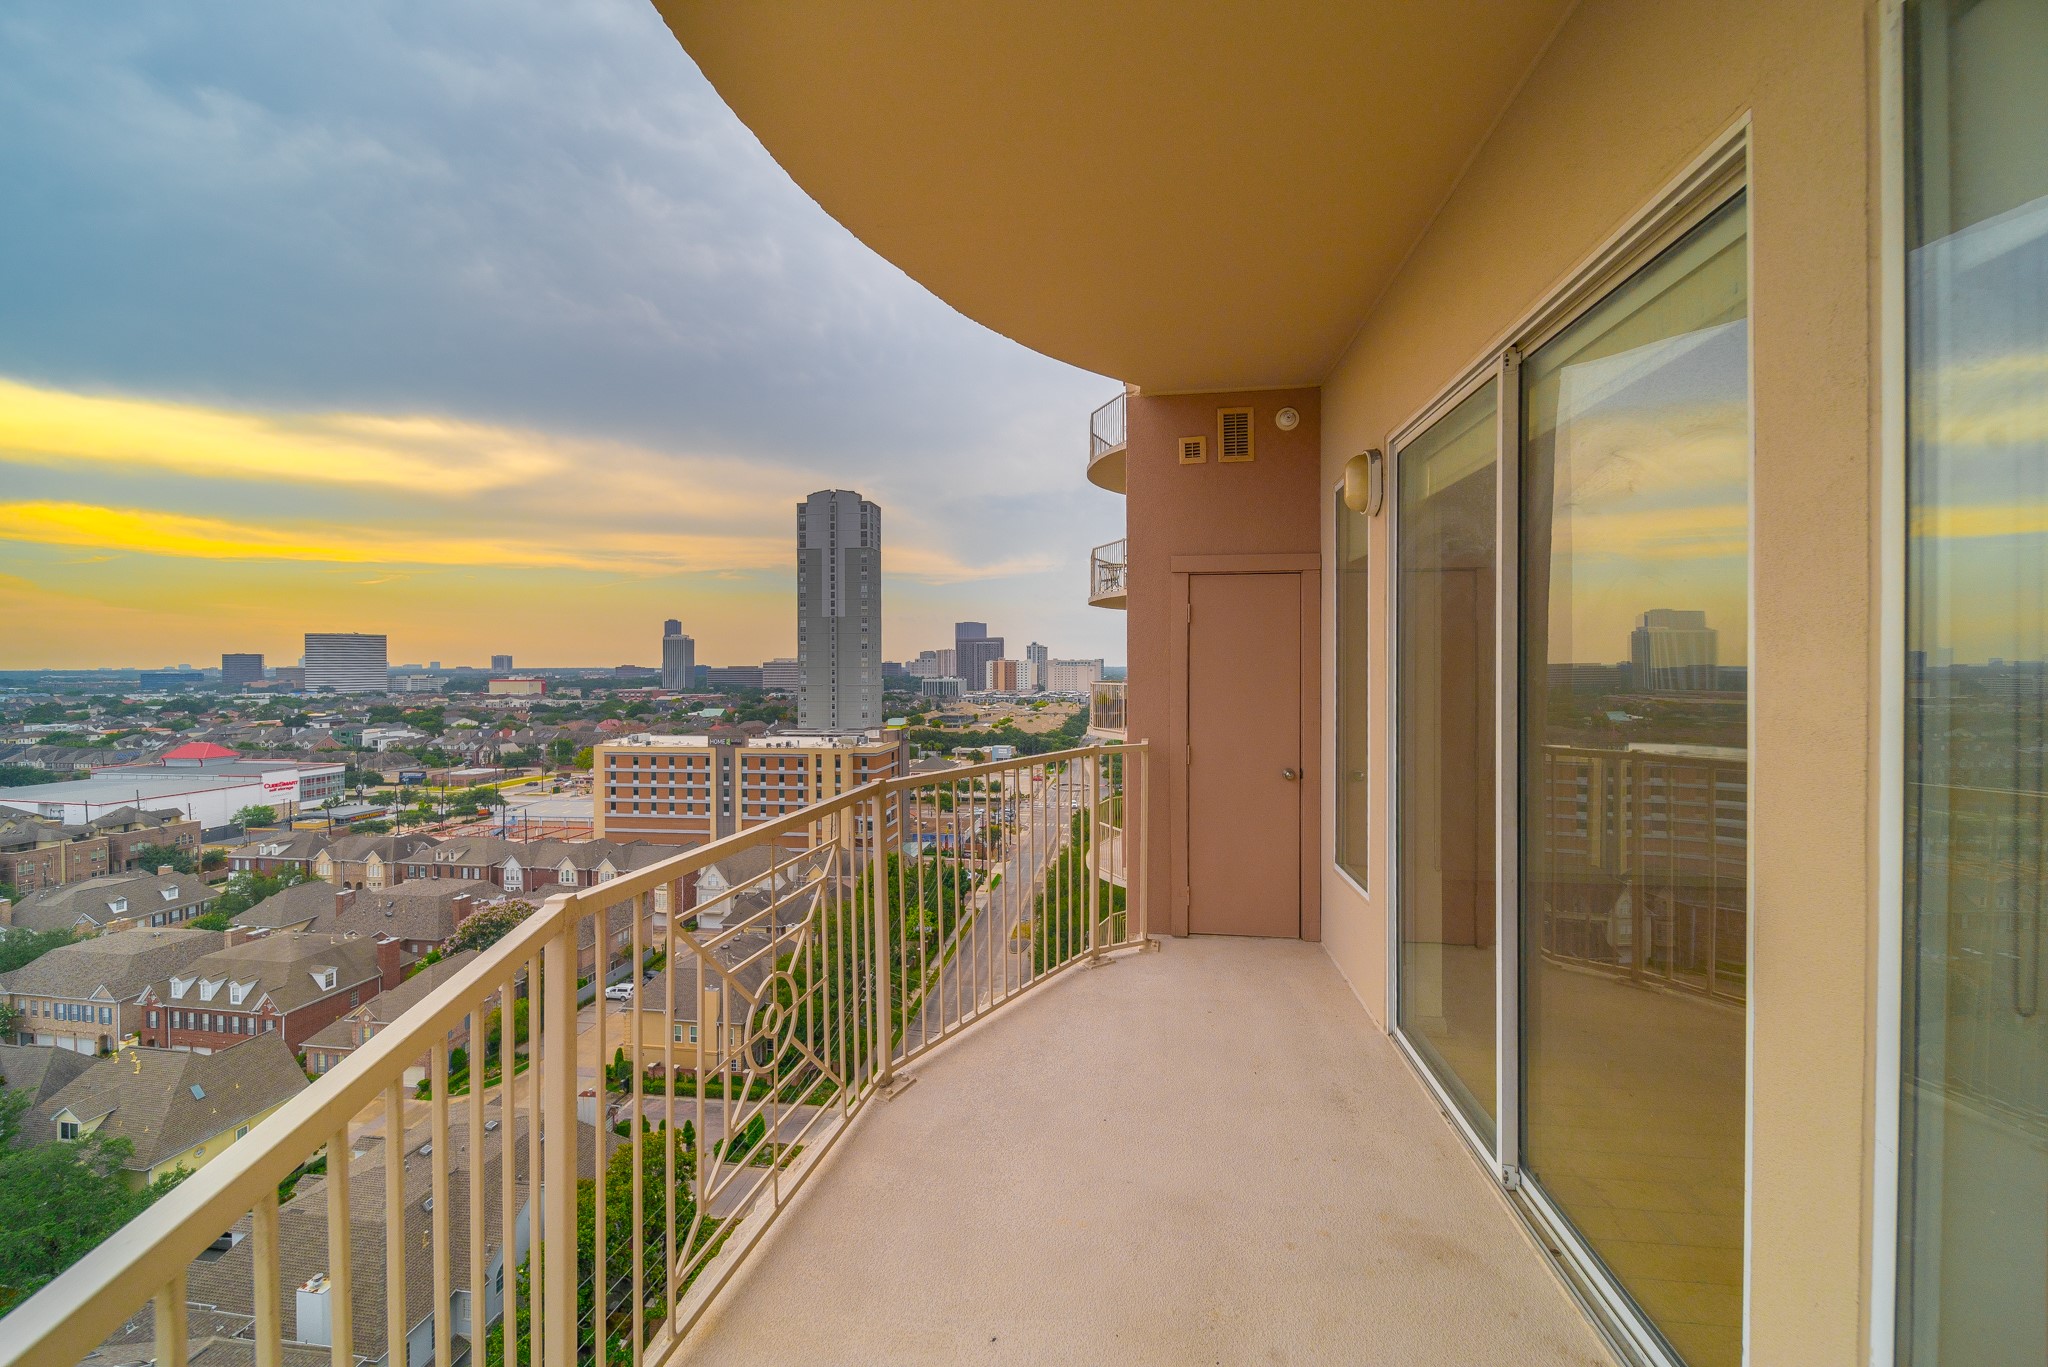 Amazing Sunsets every day from your unobstructed balcony view